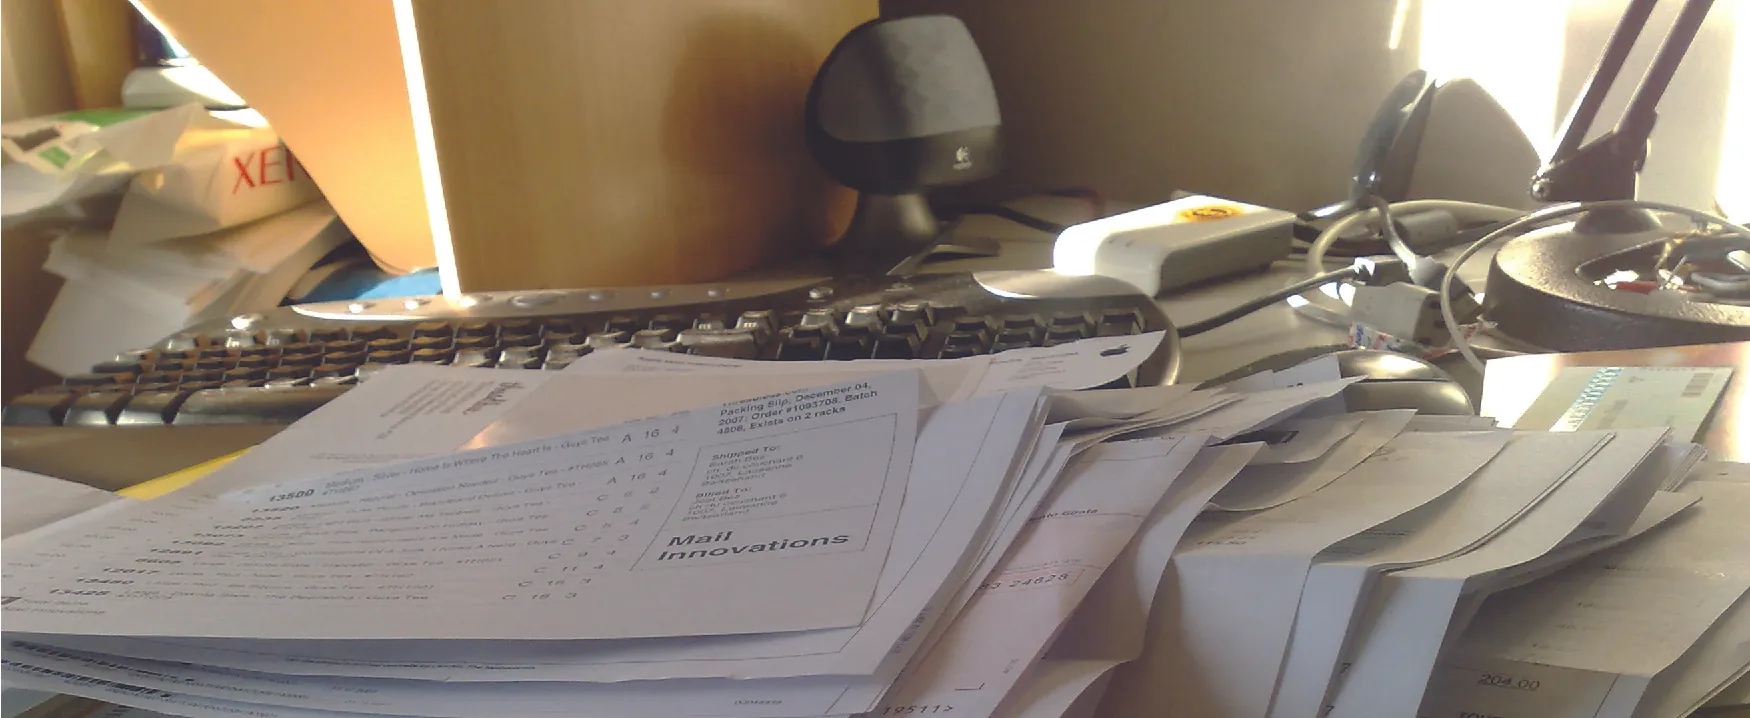 A photograph of a messy desk piled with papers, a computer keyboard in the background.